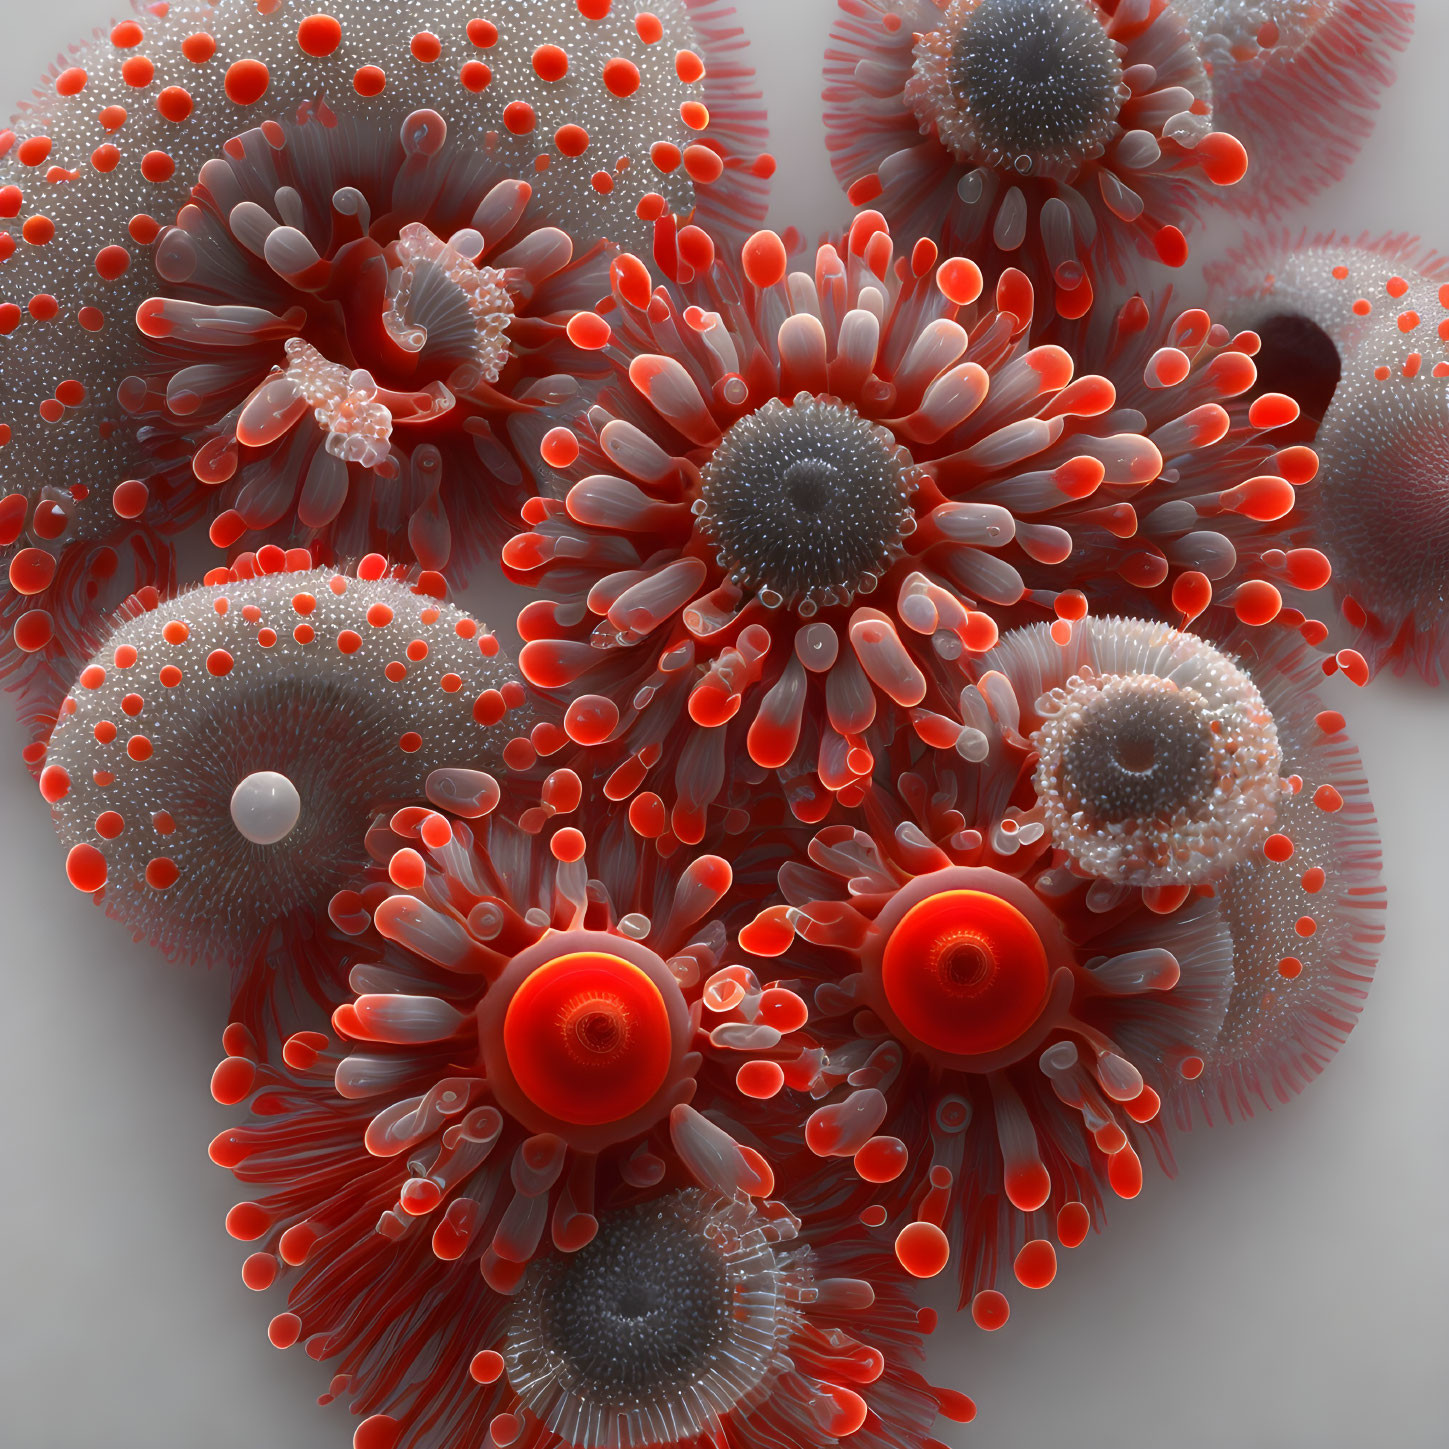 Vibrant 3D-rendered anemone-like structures in red, orange, and white